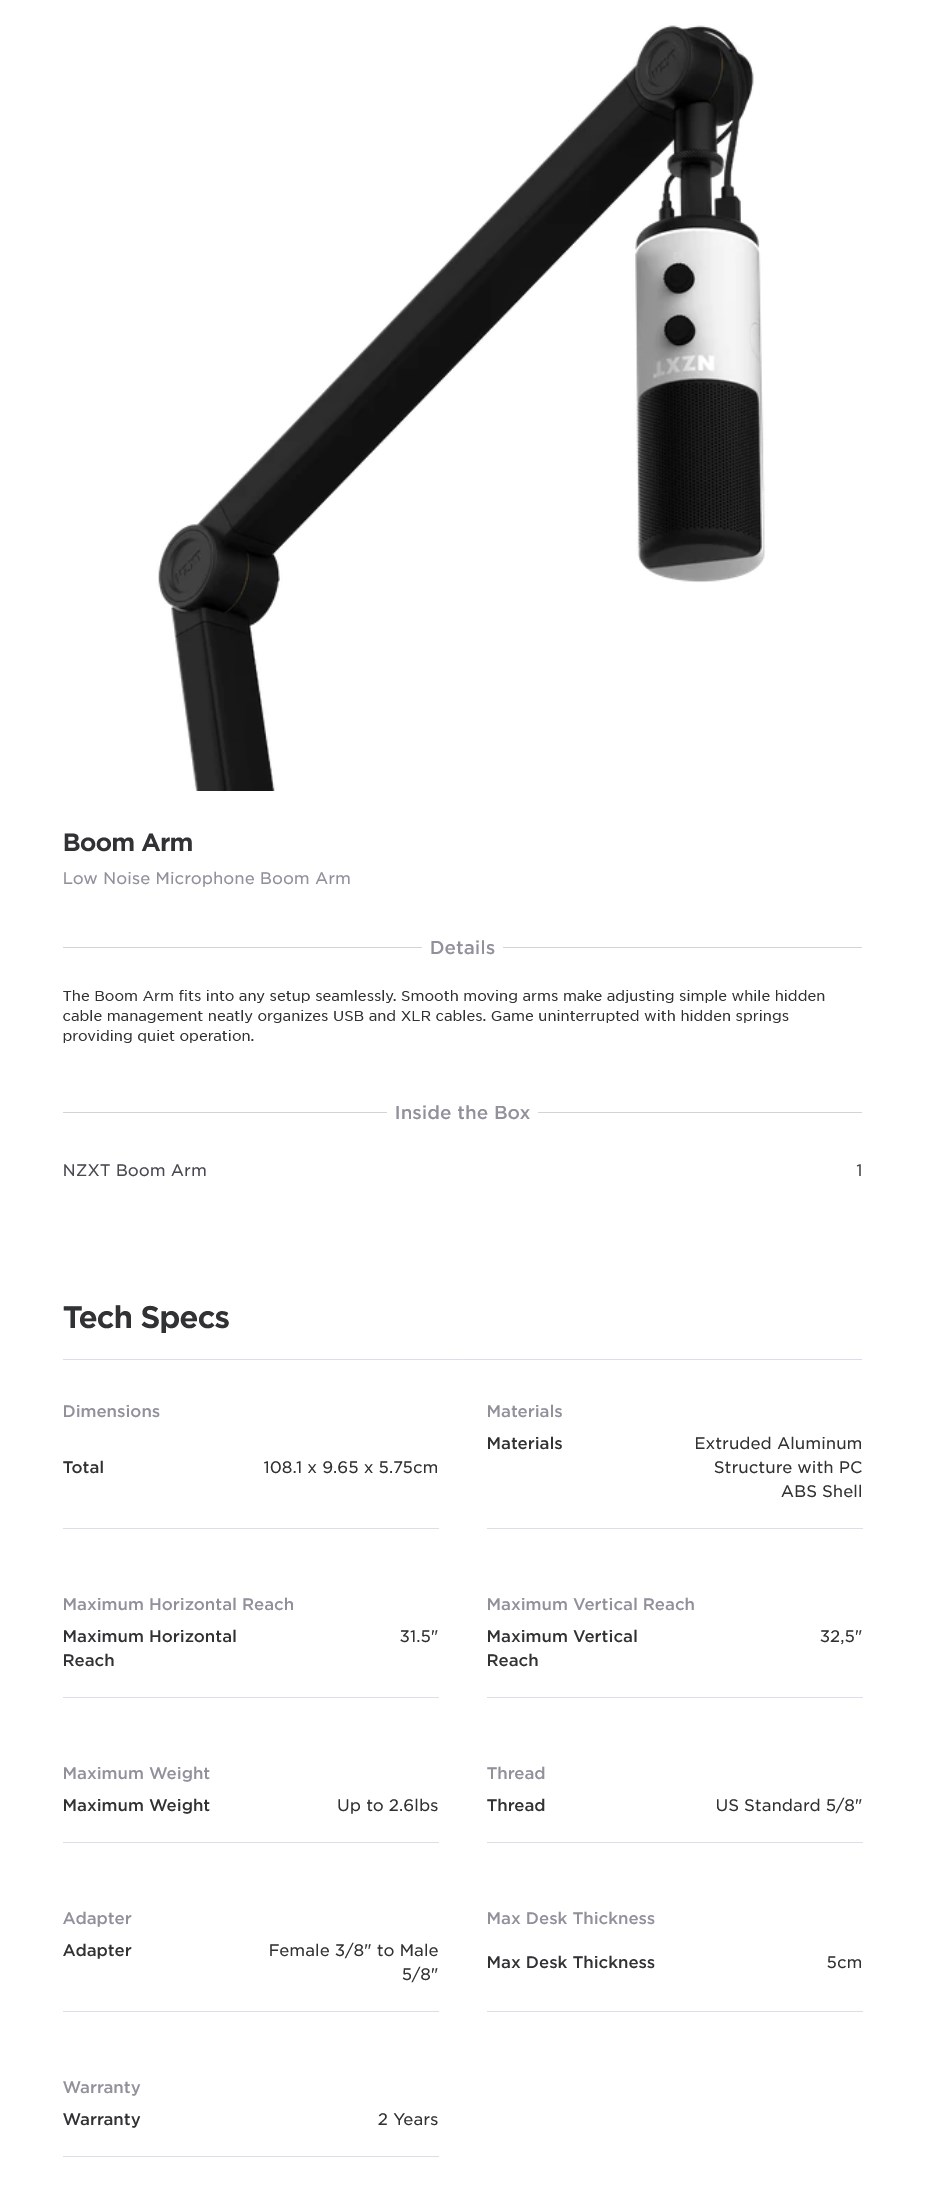 A large marketing image providing additional information about the product NZXT Microphone Boom Arm - Additional alt info not provided